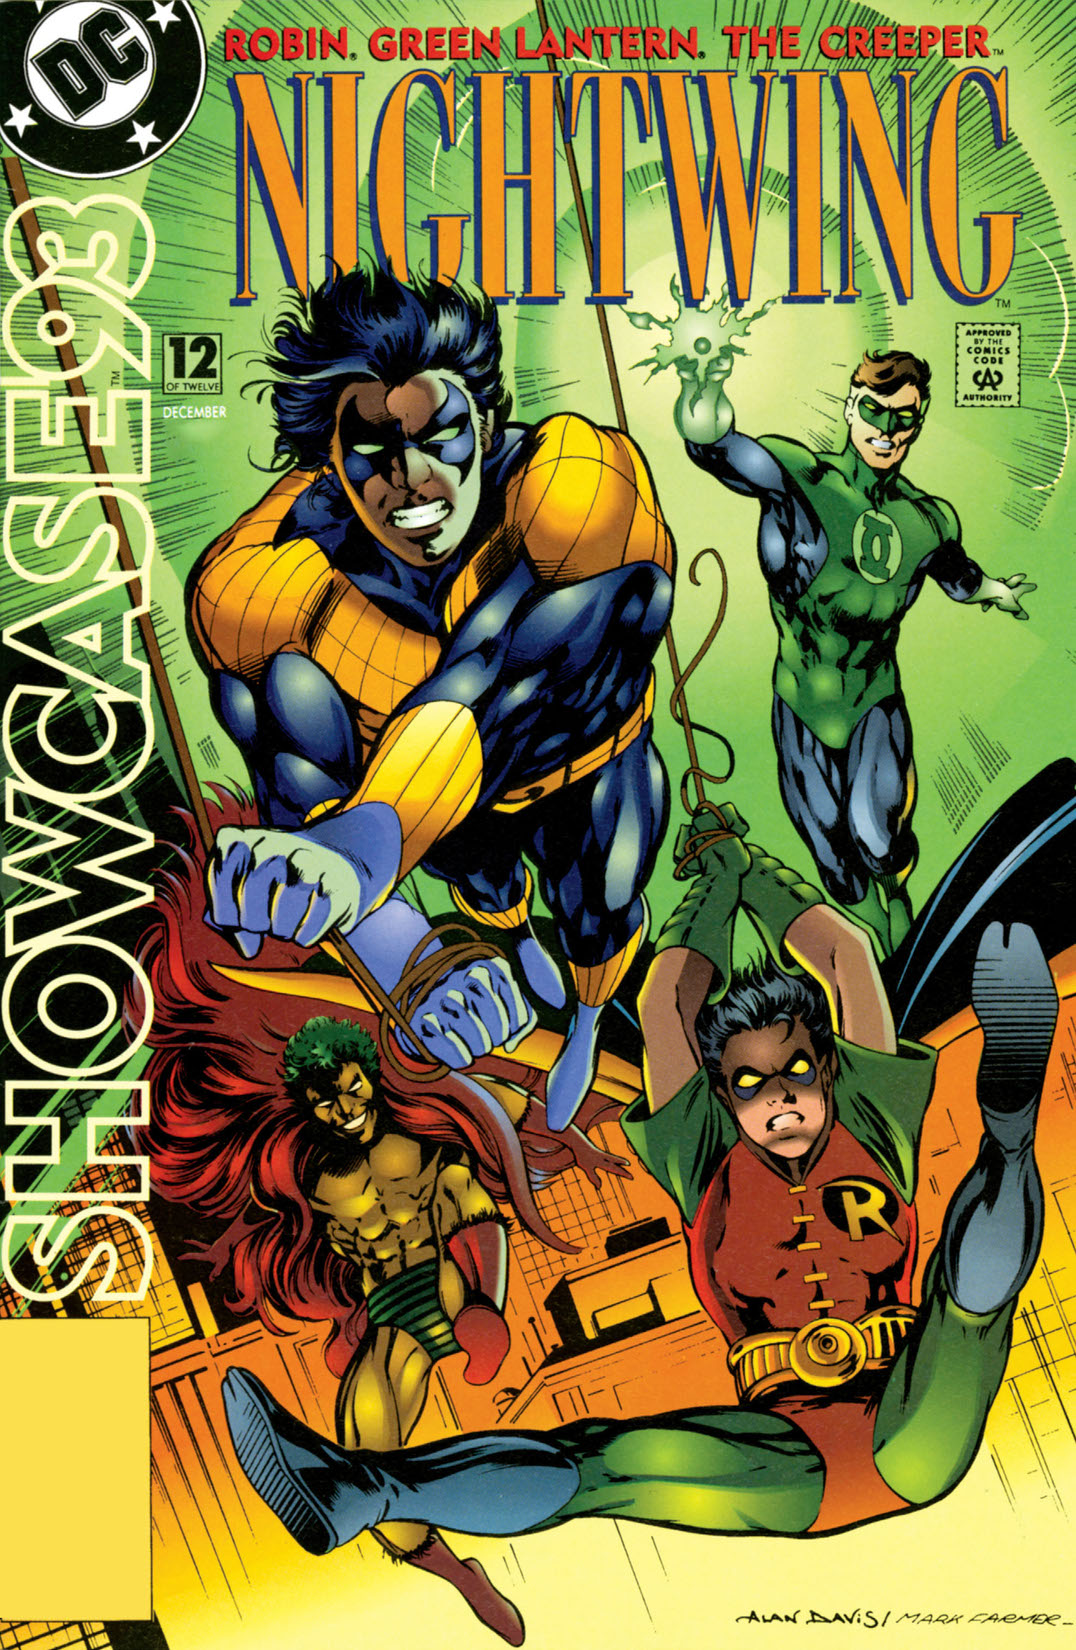 Showcase '93 #12 preview images